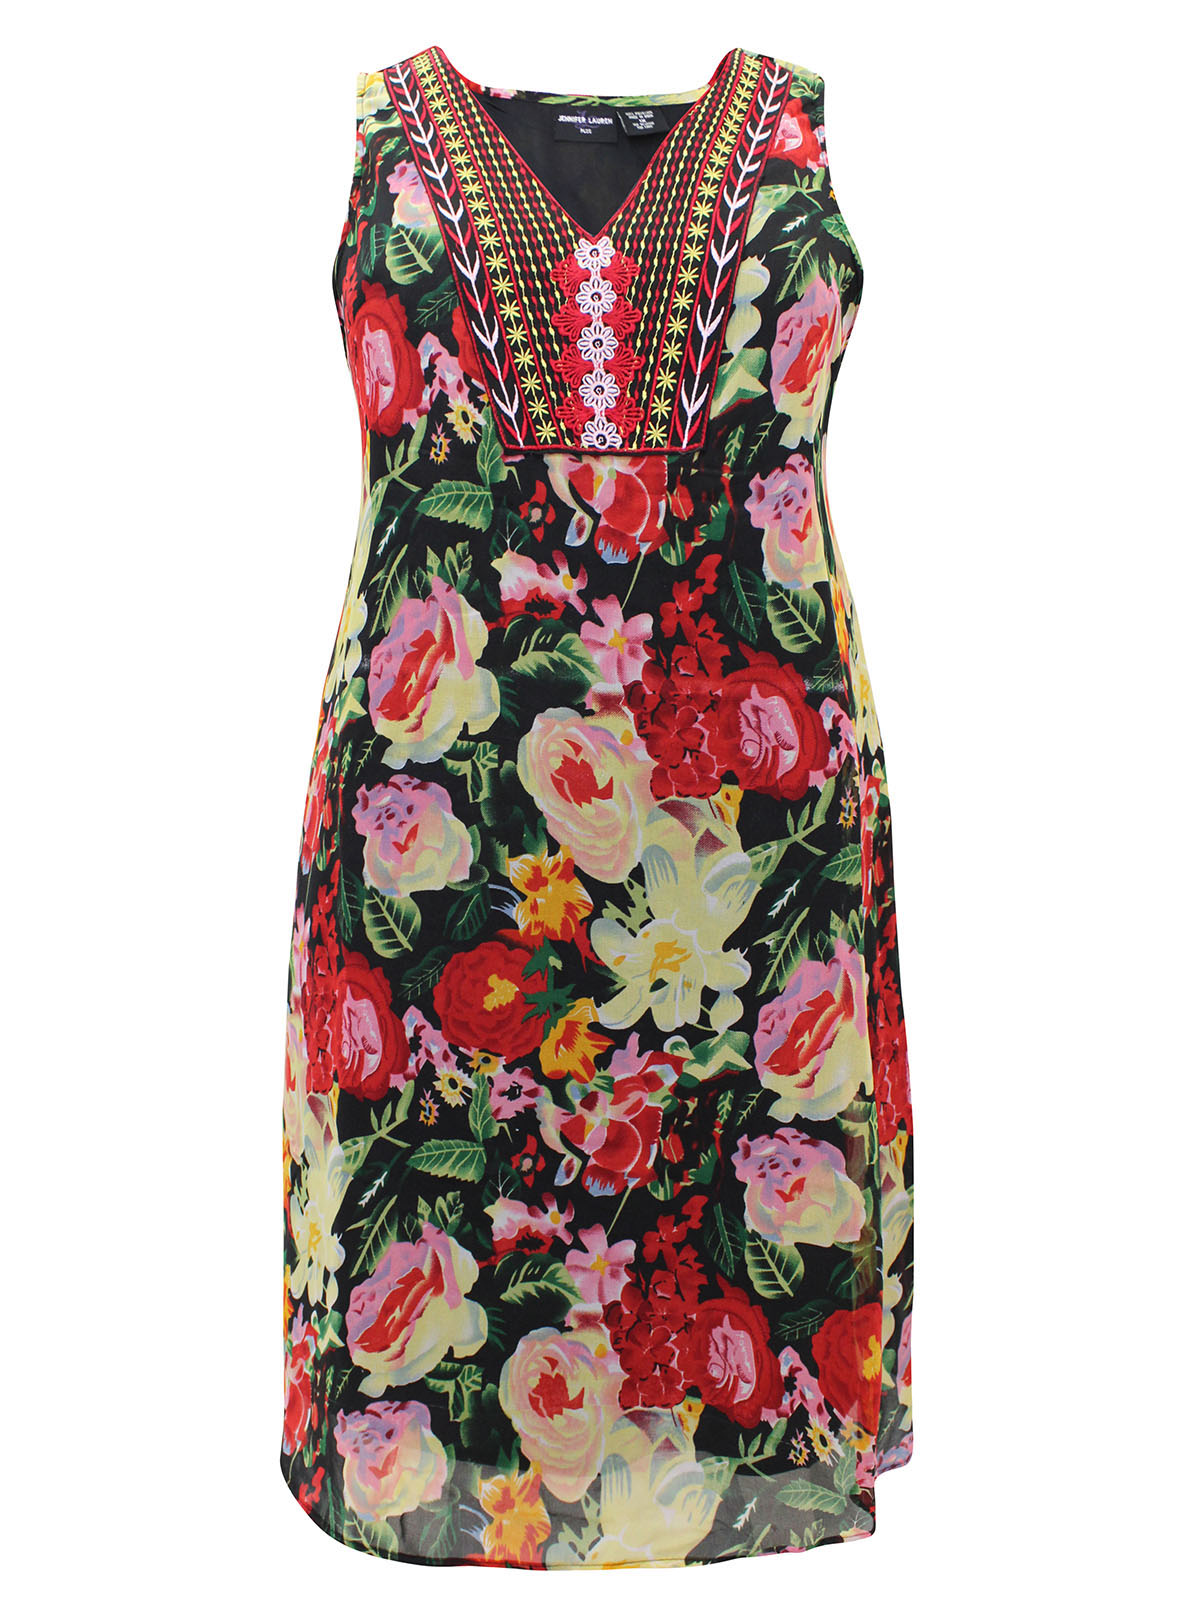 BLACK Sleeveless Floral Print Embroidered Shift Dress - Plus Size 12 to 22 (M to 3X)